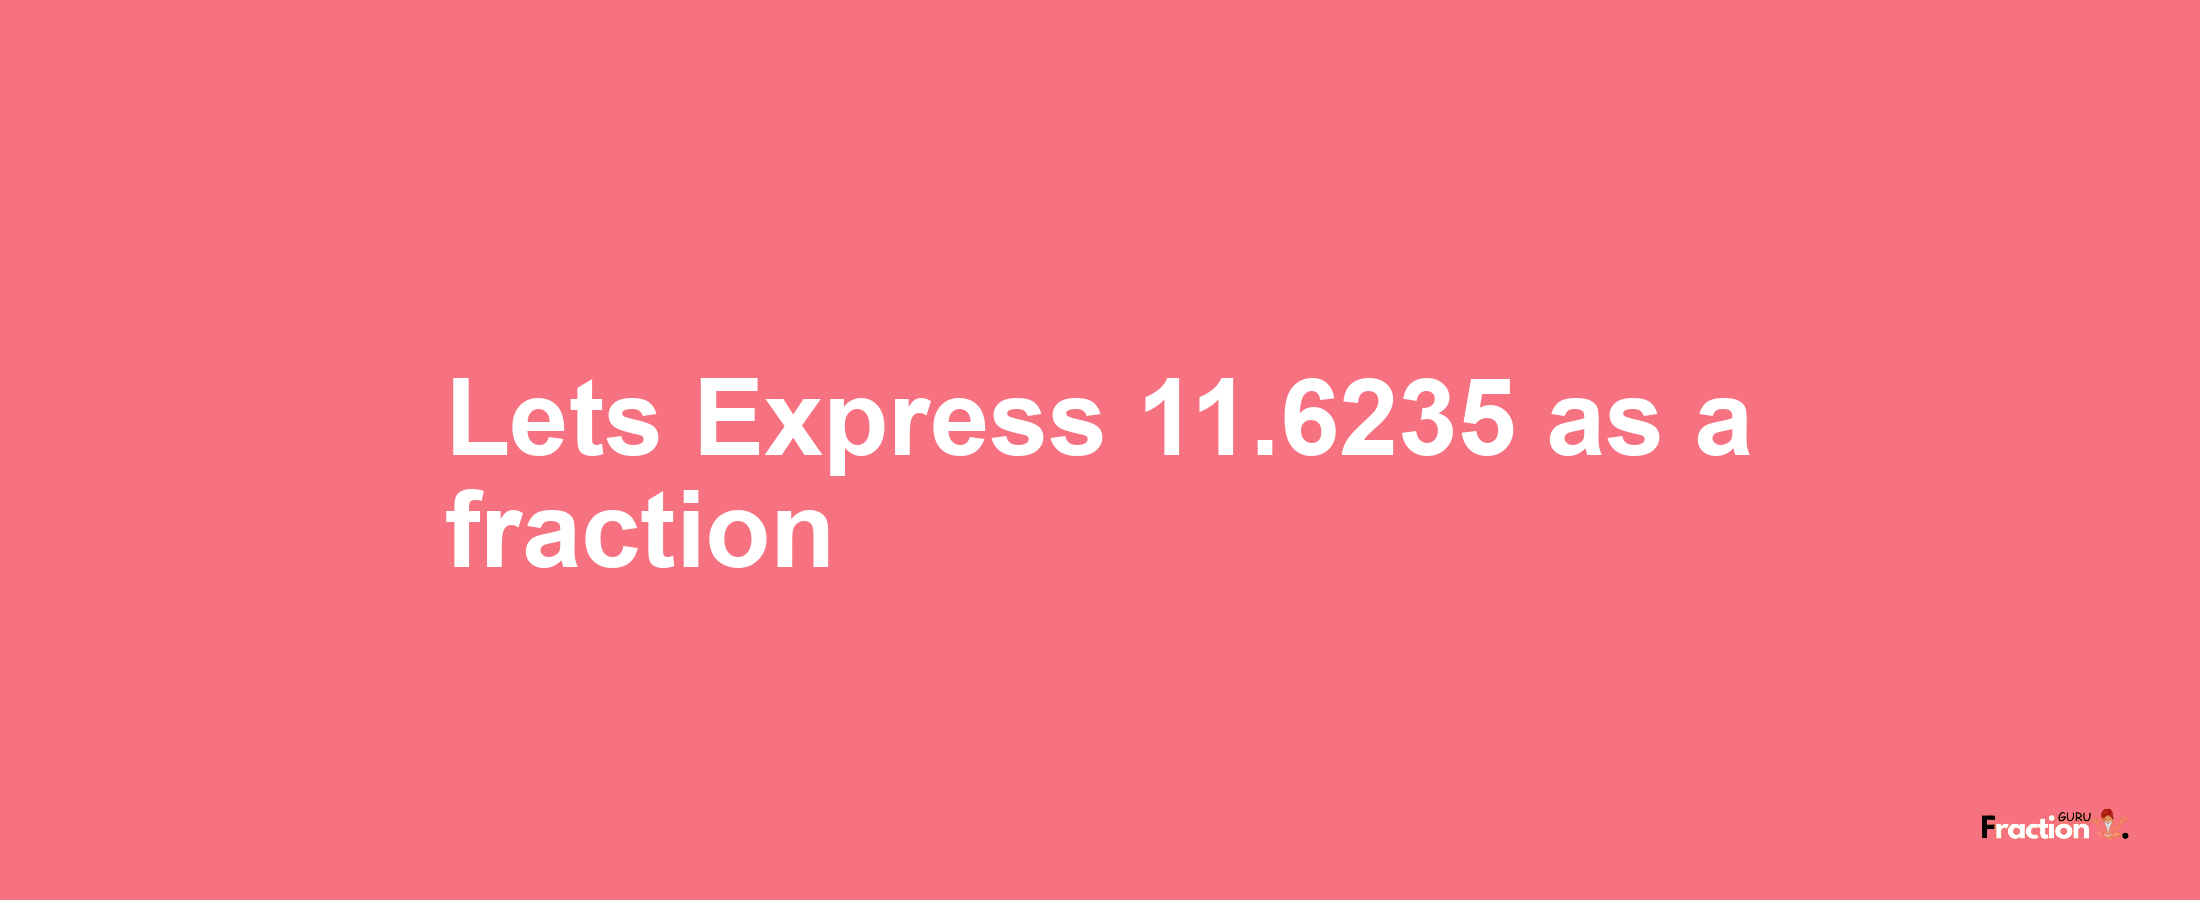 Lets Express 11.6235 as afraction